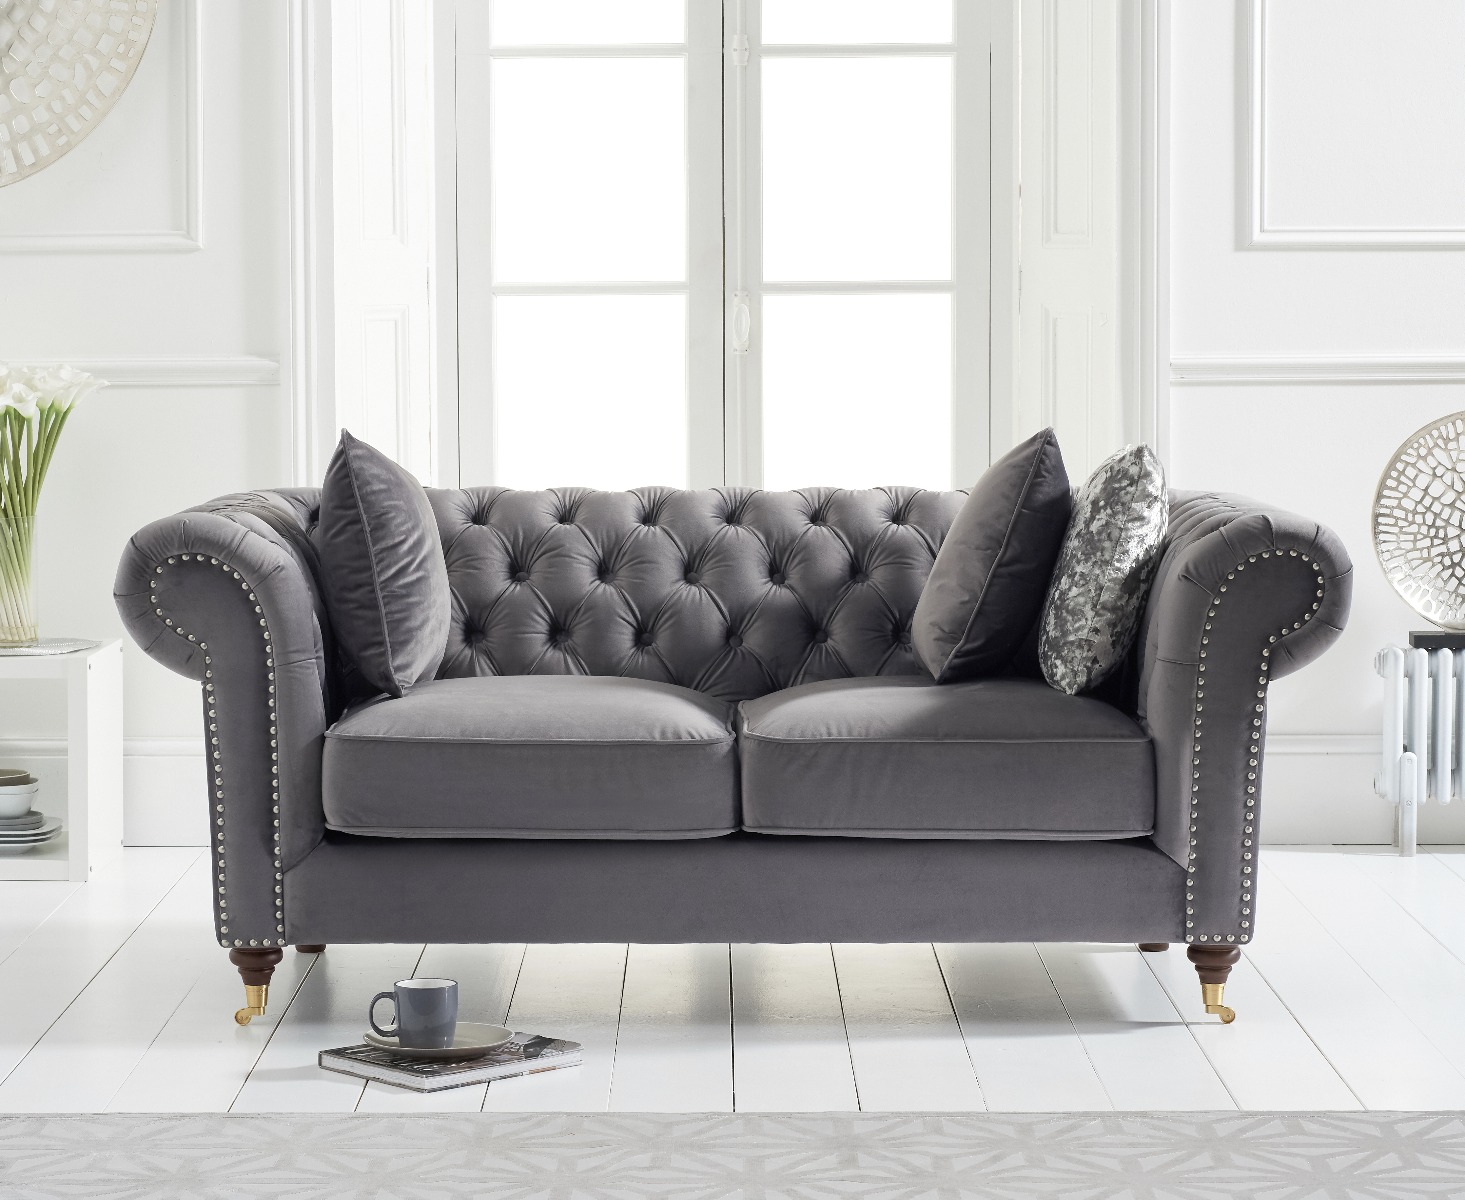 Chesterfield Grey Chesterfield Style Sofa Bed New-Ex Display Bargain!!! 